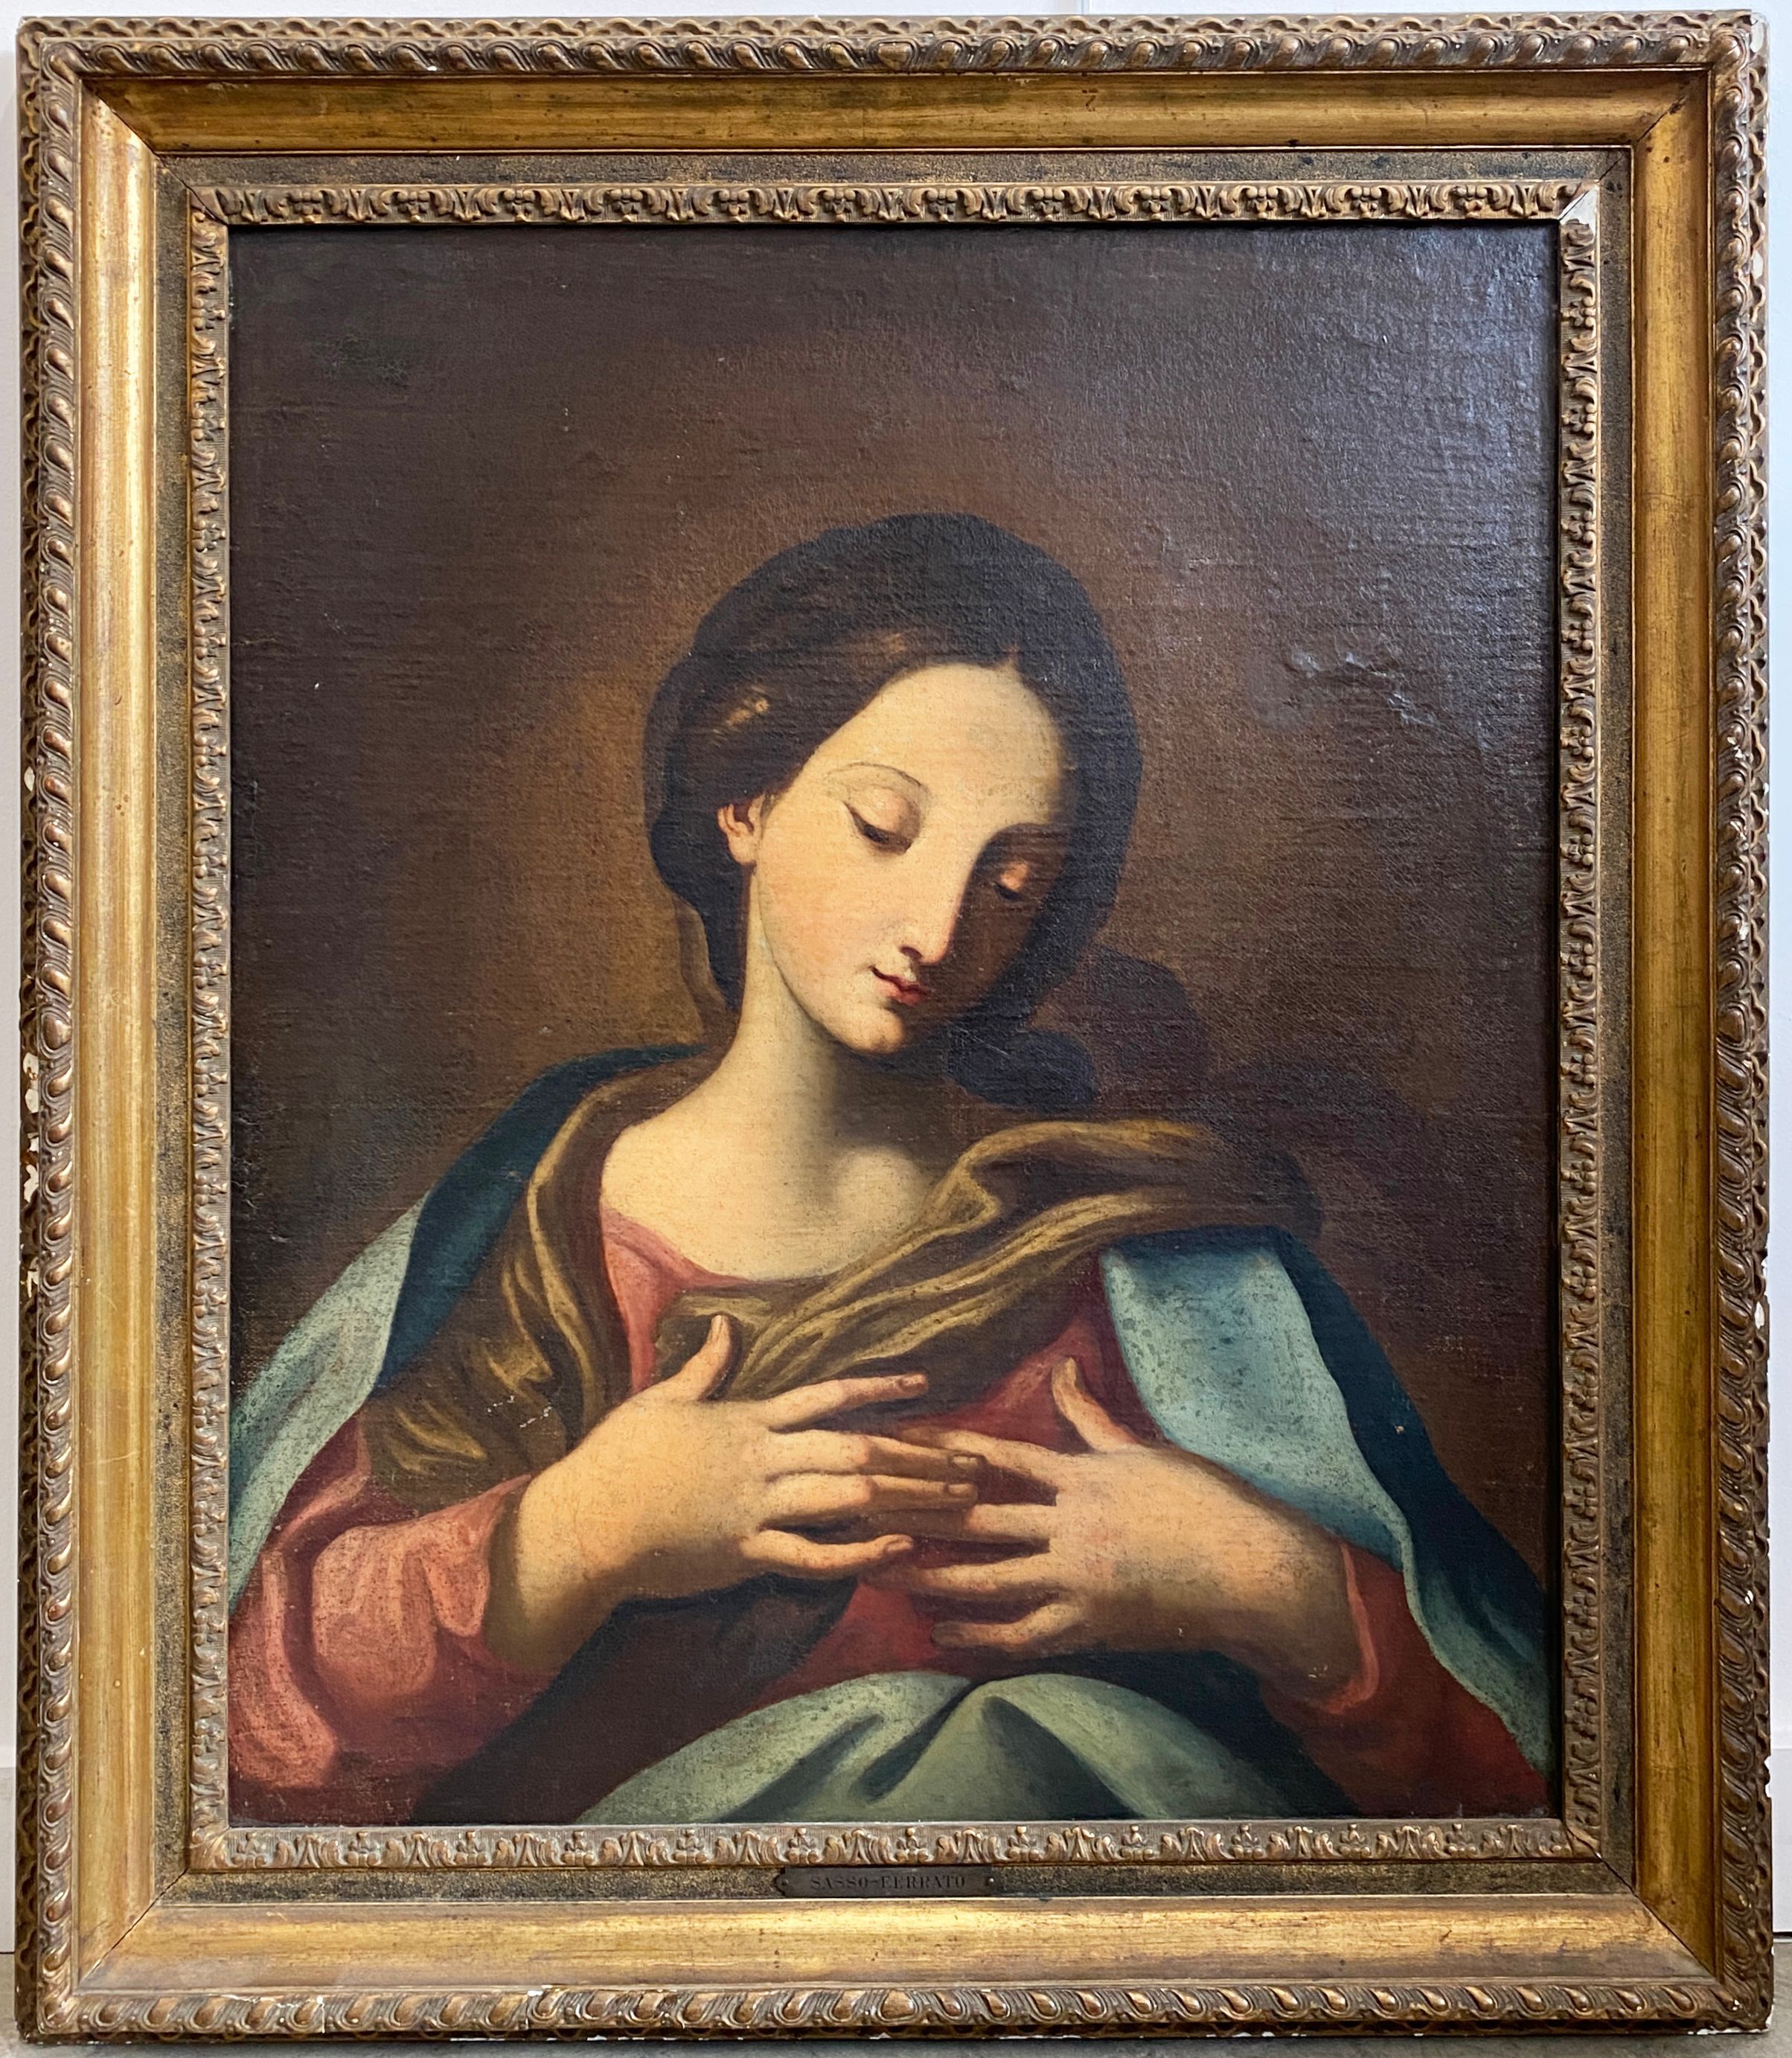 Oil on canvas depicting a Madonna